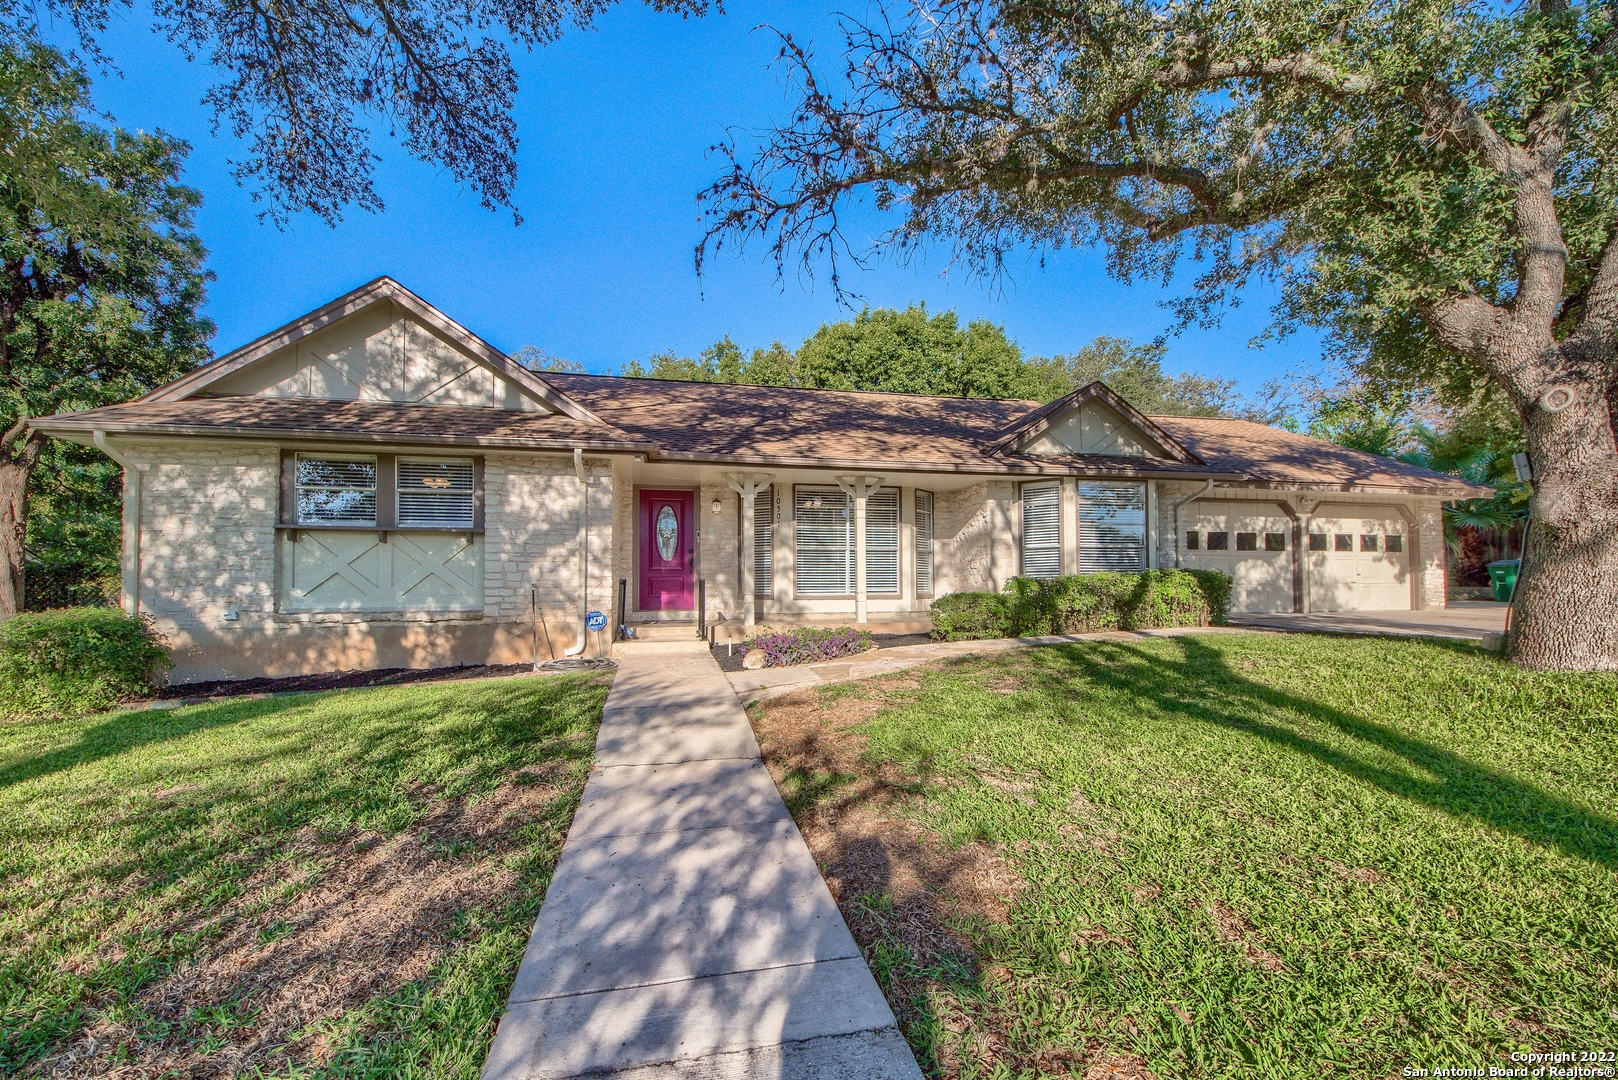 *OPEN HOUSE SUN. (1/29) 10:30-2!* OWNER FINANCING AVAILABLE FOR THIS GORGEOUSLY RENOVATED CASTLE PARK ESTATE ON A THIRD OF AN ACRE WITH A TANDEM THREE-CAR GARAGE AND CASITA! Nestled just between Lockhill-Selma and Blanco, just outside Loop 410 and Castle Hills, this home's location would be enough to shout about but to see it is to believe what a gem it truly is! Wind through the quiet, tree-lined streets past gracious estate homes on large lots & pull up to this classic single story, limestone rancher set up on a rise for stunning curb appeal and graced by mature oaks. Step inside to a welcoming home that leaves you wanting for nothing. Luxury wood-look vinyl plank flooring greets you at the foyer and stretches through the living areas and bedrooms. A huge living space is open to a formal dining both with views through charming bay windows. The ceiling opens to a beamed cathedral in the family room which boasts a centerpiece fireplace with long limestone bench from where you can enjoy a view of the lush, large backyard, shaded by mature trees. Chat with the chef in the kitchen who can cook with a gas range and have plenty of space to spread out the dishes with an expanse of upscale biscotti white granite countertops. New white shaker cabinetry, stainless appliances, an eat-at island with storage space, breakfast nook and granite topped coffee bar round out the offerings in this tremendous kitchen! As you head into the bedroom wing, notice all the new burnished bronze light, ceiling fan, kitchen and bathroom fixtures that offer a consistent look of high end luxury. The master suite is tucked at the far back corner of the home with a large walk-in closet, access to the backyard and ensuite bath. Check out this bright, happy, luxurious bathroom with a bay window, double granite vanities, custom mirrors and a sleek step-in shower to die for with its glamorous glass, custom tile work and two shower heads! The secondary bedrooms are roomy and share an oversized bathroom with travertine tile surround, double granite vanity and a walk-in shower than can accommodate folks in wheelchairs or walkers. The utility room is as large as a bedroom with cabinetry storage, and space for shelving, storage, ironing board and/or extra fridge. The attached garage is sure to please with double doors, tandem space for 3 vehicles or two with a big space for workshop or storage. It is textured and painted so would easily convert to living space if needed, but who needs that with the casita out back!  Step through a door at the rear of the garage to your efficiency guest house, so cute with a small front porch with a perfect view of the expansive backyard. Inside find luxury vinyl flooring, natural light, a full brand new bathroom with walk-in shower and room for futon or bed and sitting area ideal for mom or out of town guests but also suited for an office or to rent out as you can access it separately from gate at the extended driveway! Enjoy the peace of your property on cool fall evenings from the long, covered back porch.  The alley behind offers an additional buffer for privacy from the neighbors. The driveway widens at the garage to 3 vehicles width then continues along the side of the garage for extra outside parking, RV storage, and direct access to the backyard and casita. A sprinkler system on your full 1/3 acre makes keeping a green St. Augustine lawn easy! Make note of the four-sides rock, gutters front and back and 30-year shingles. All this set in one of the most sought after established neighborhoods in North Central-- aesthetics and convenience just north of 410! 10 minutes from the Quarry and the Pearl and easy commutes downtown to I-10, 281, Fort Sam, SAMMC and Lackland. NEISD. This beauty is a classic mid-century charmer with all the modern updates -- proof they don't build them like they used to! Add to this perfect recipe the magic ADU (Additional Dwelling Unit!)/Casita for rental income, detached office or guests.